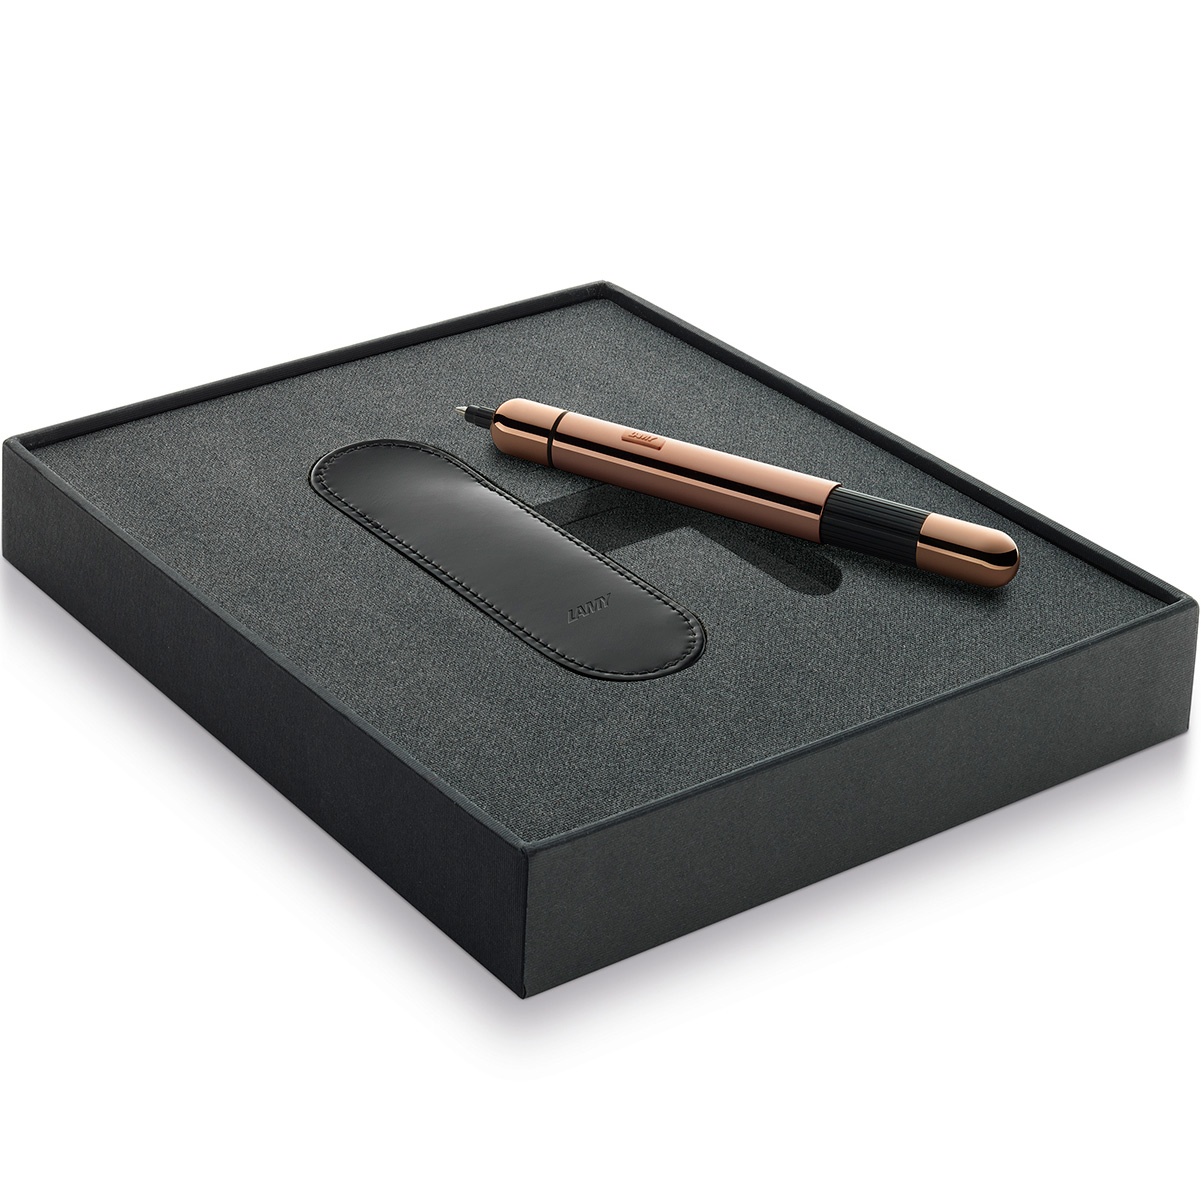 Pico Ballpoint Lx Rosegold in the group Pens / Fine Writing / Gift Pens at Pen Store (102122)